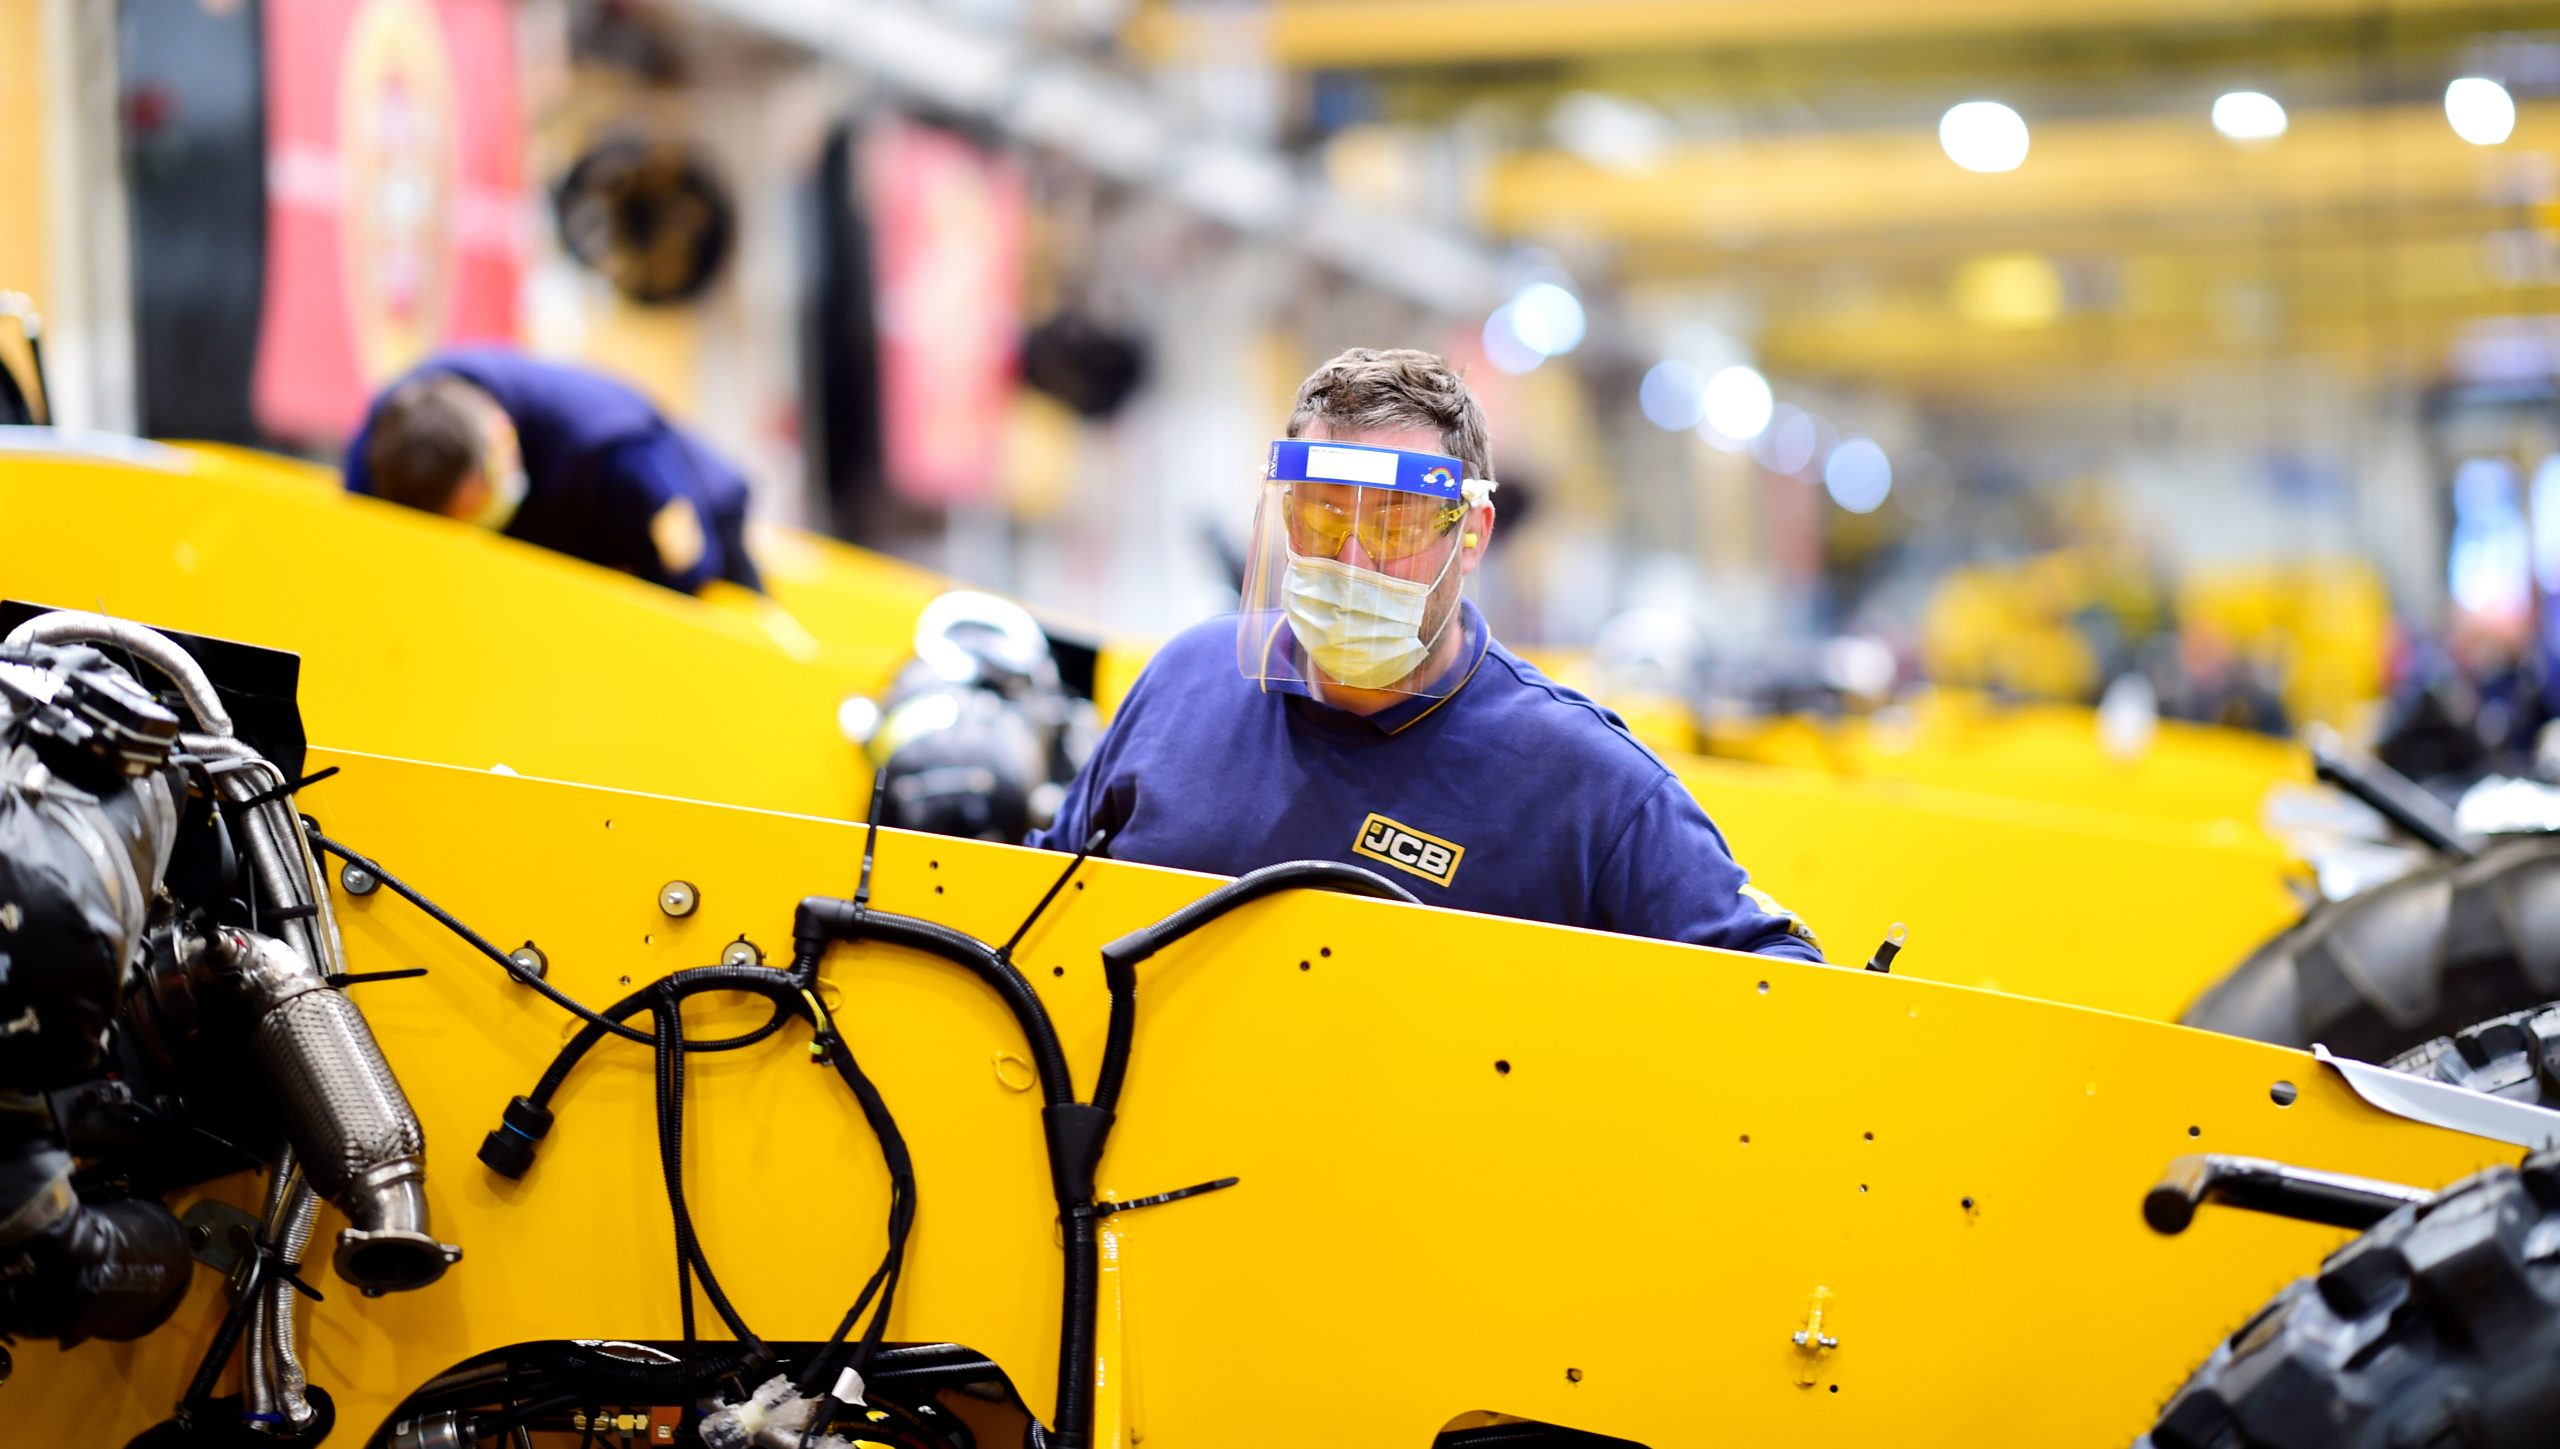 Read more about the article JCB TO RECRUIT MORE THAN 400 PEOPLE AS PRODUCTION SET TO SURGE